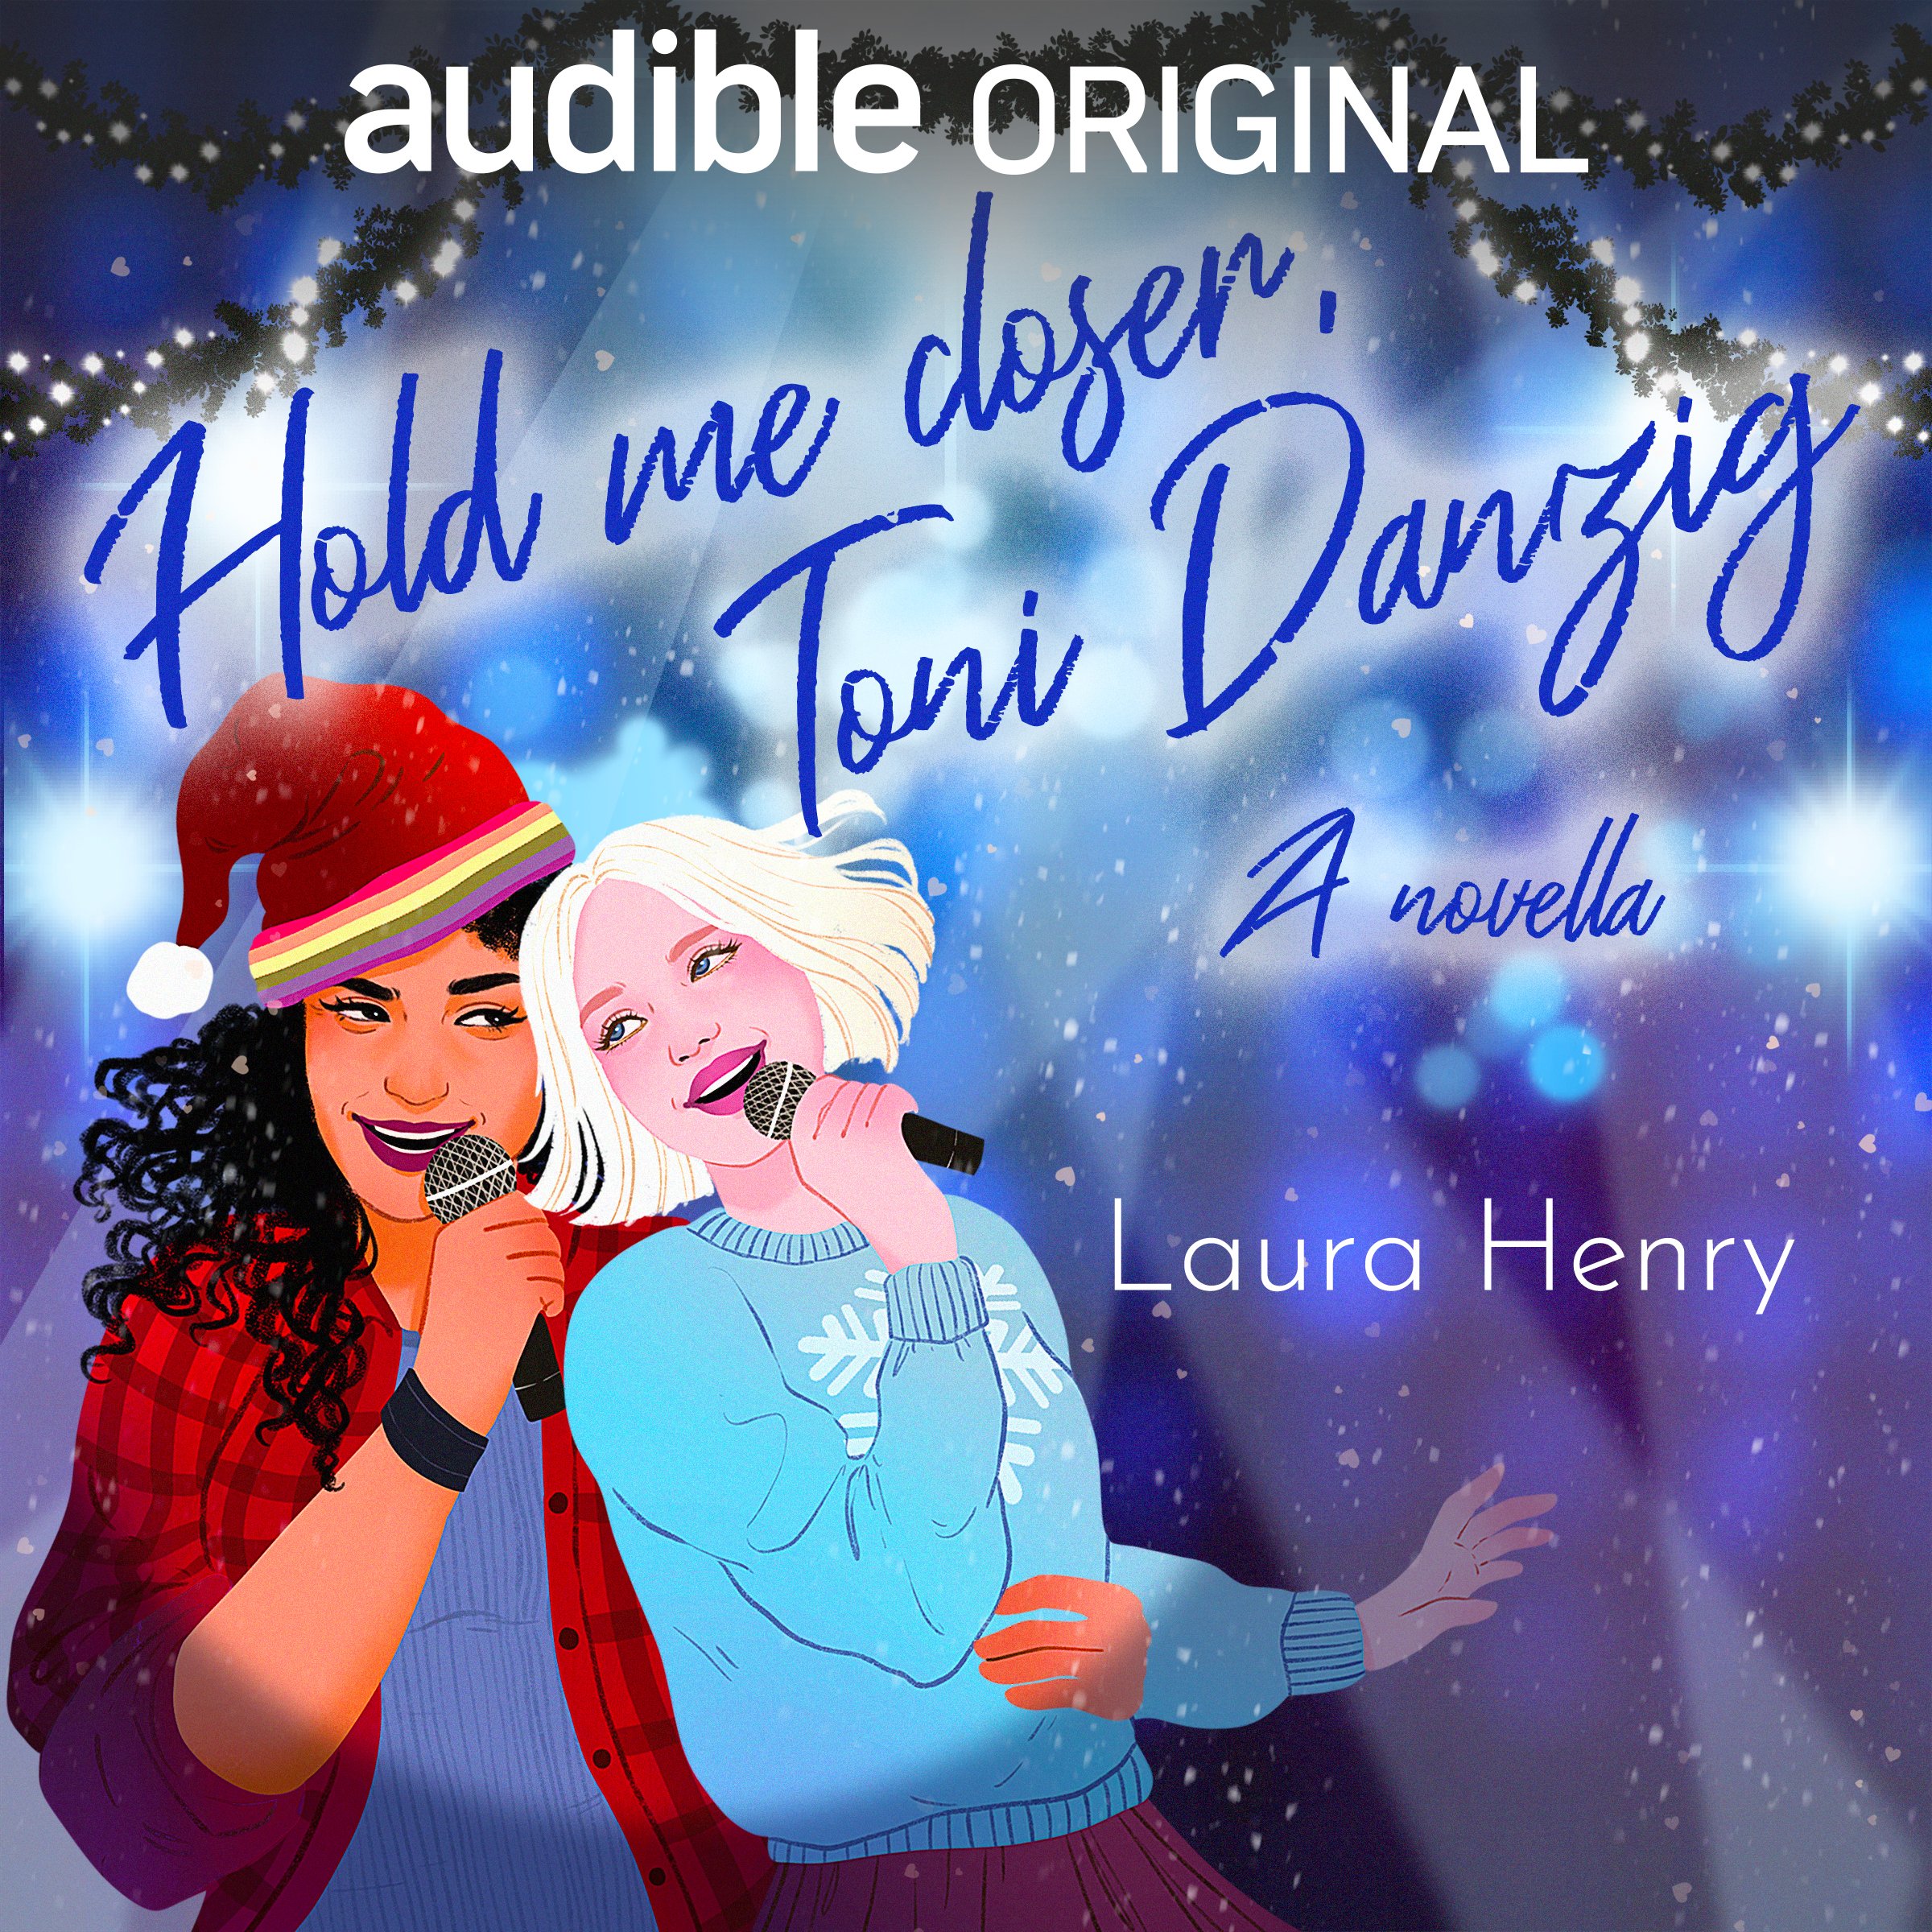 Cover for "Hold me closer, Toni Danzig" by Laura Henry